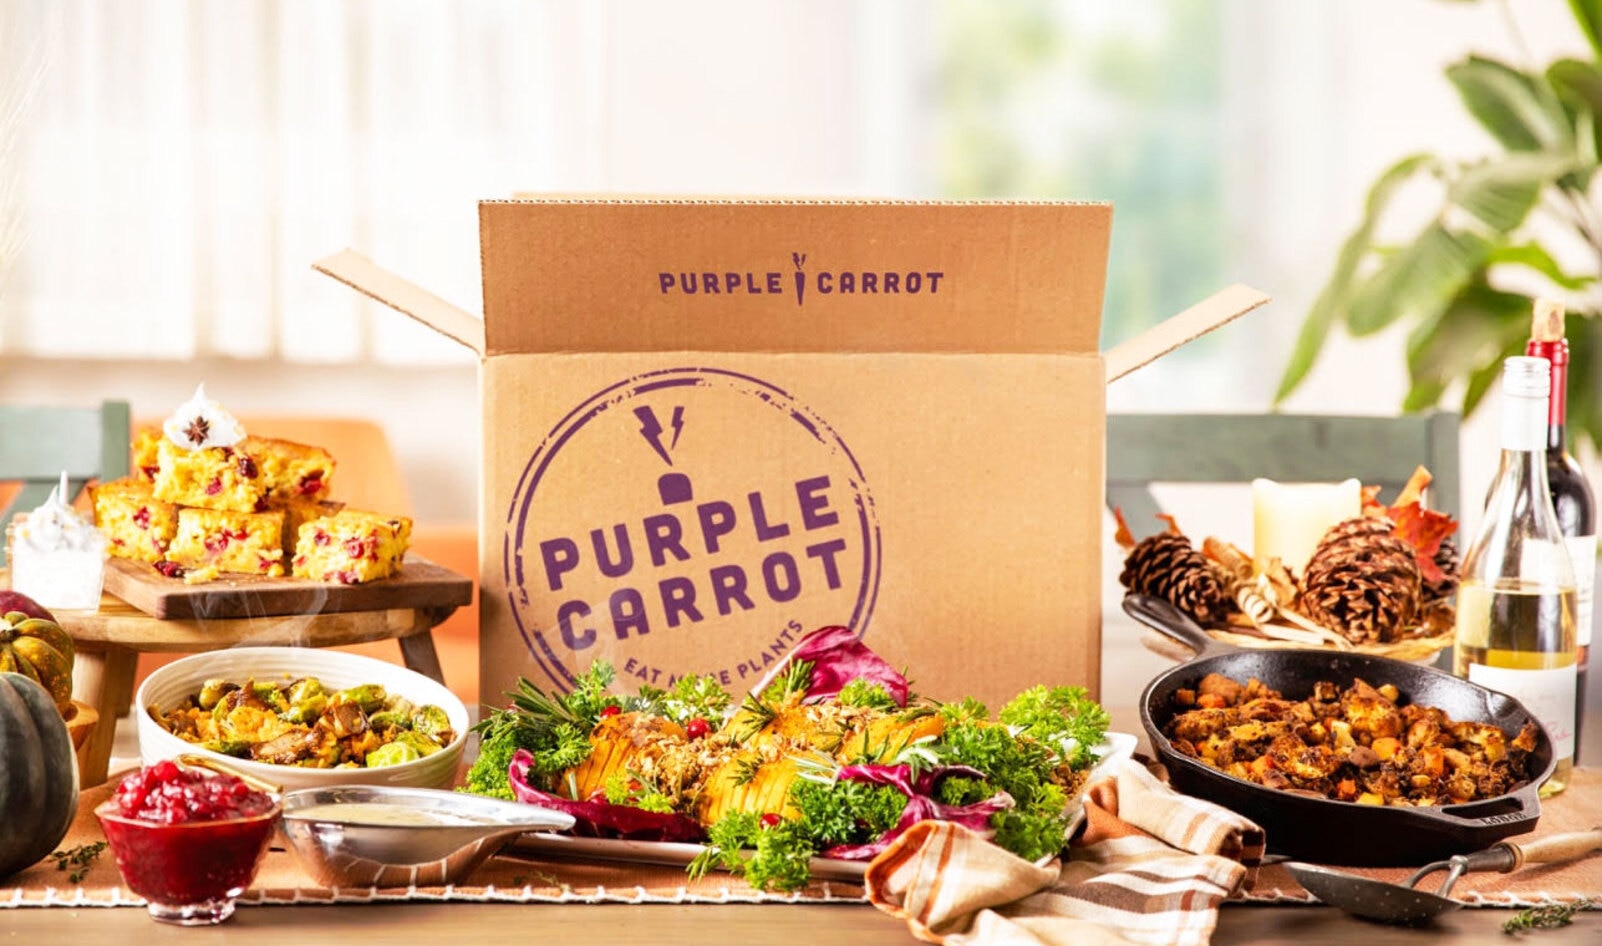 Meal-Kit Company Purple Carrot Launches Vegan Thanksgiving Box Nationwide